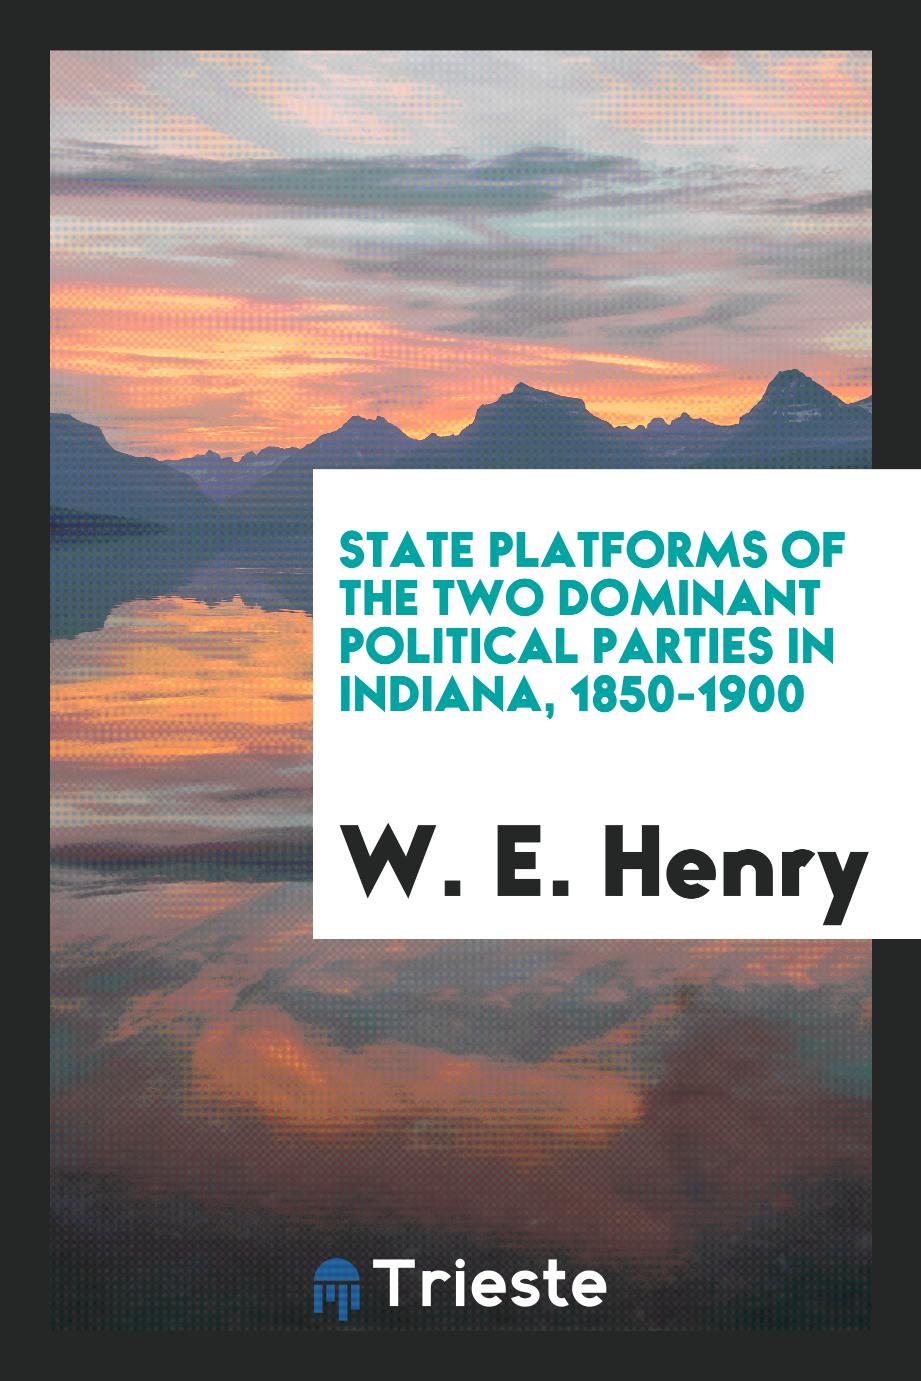 State Platforms of the Two Dominant Political Parties in Indiana, 1850-1900